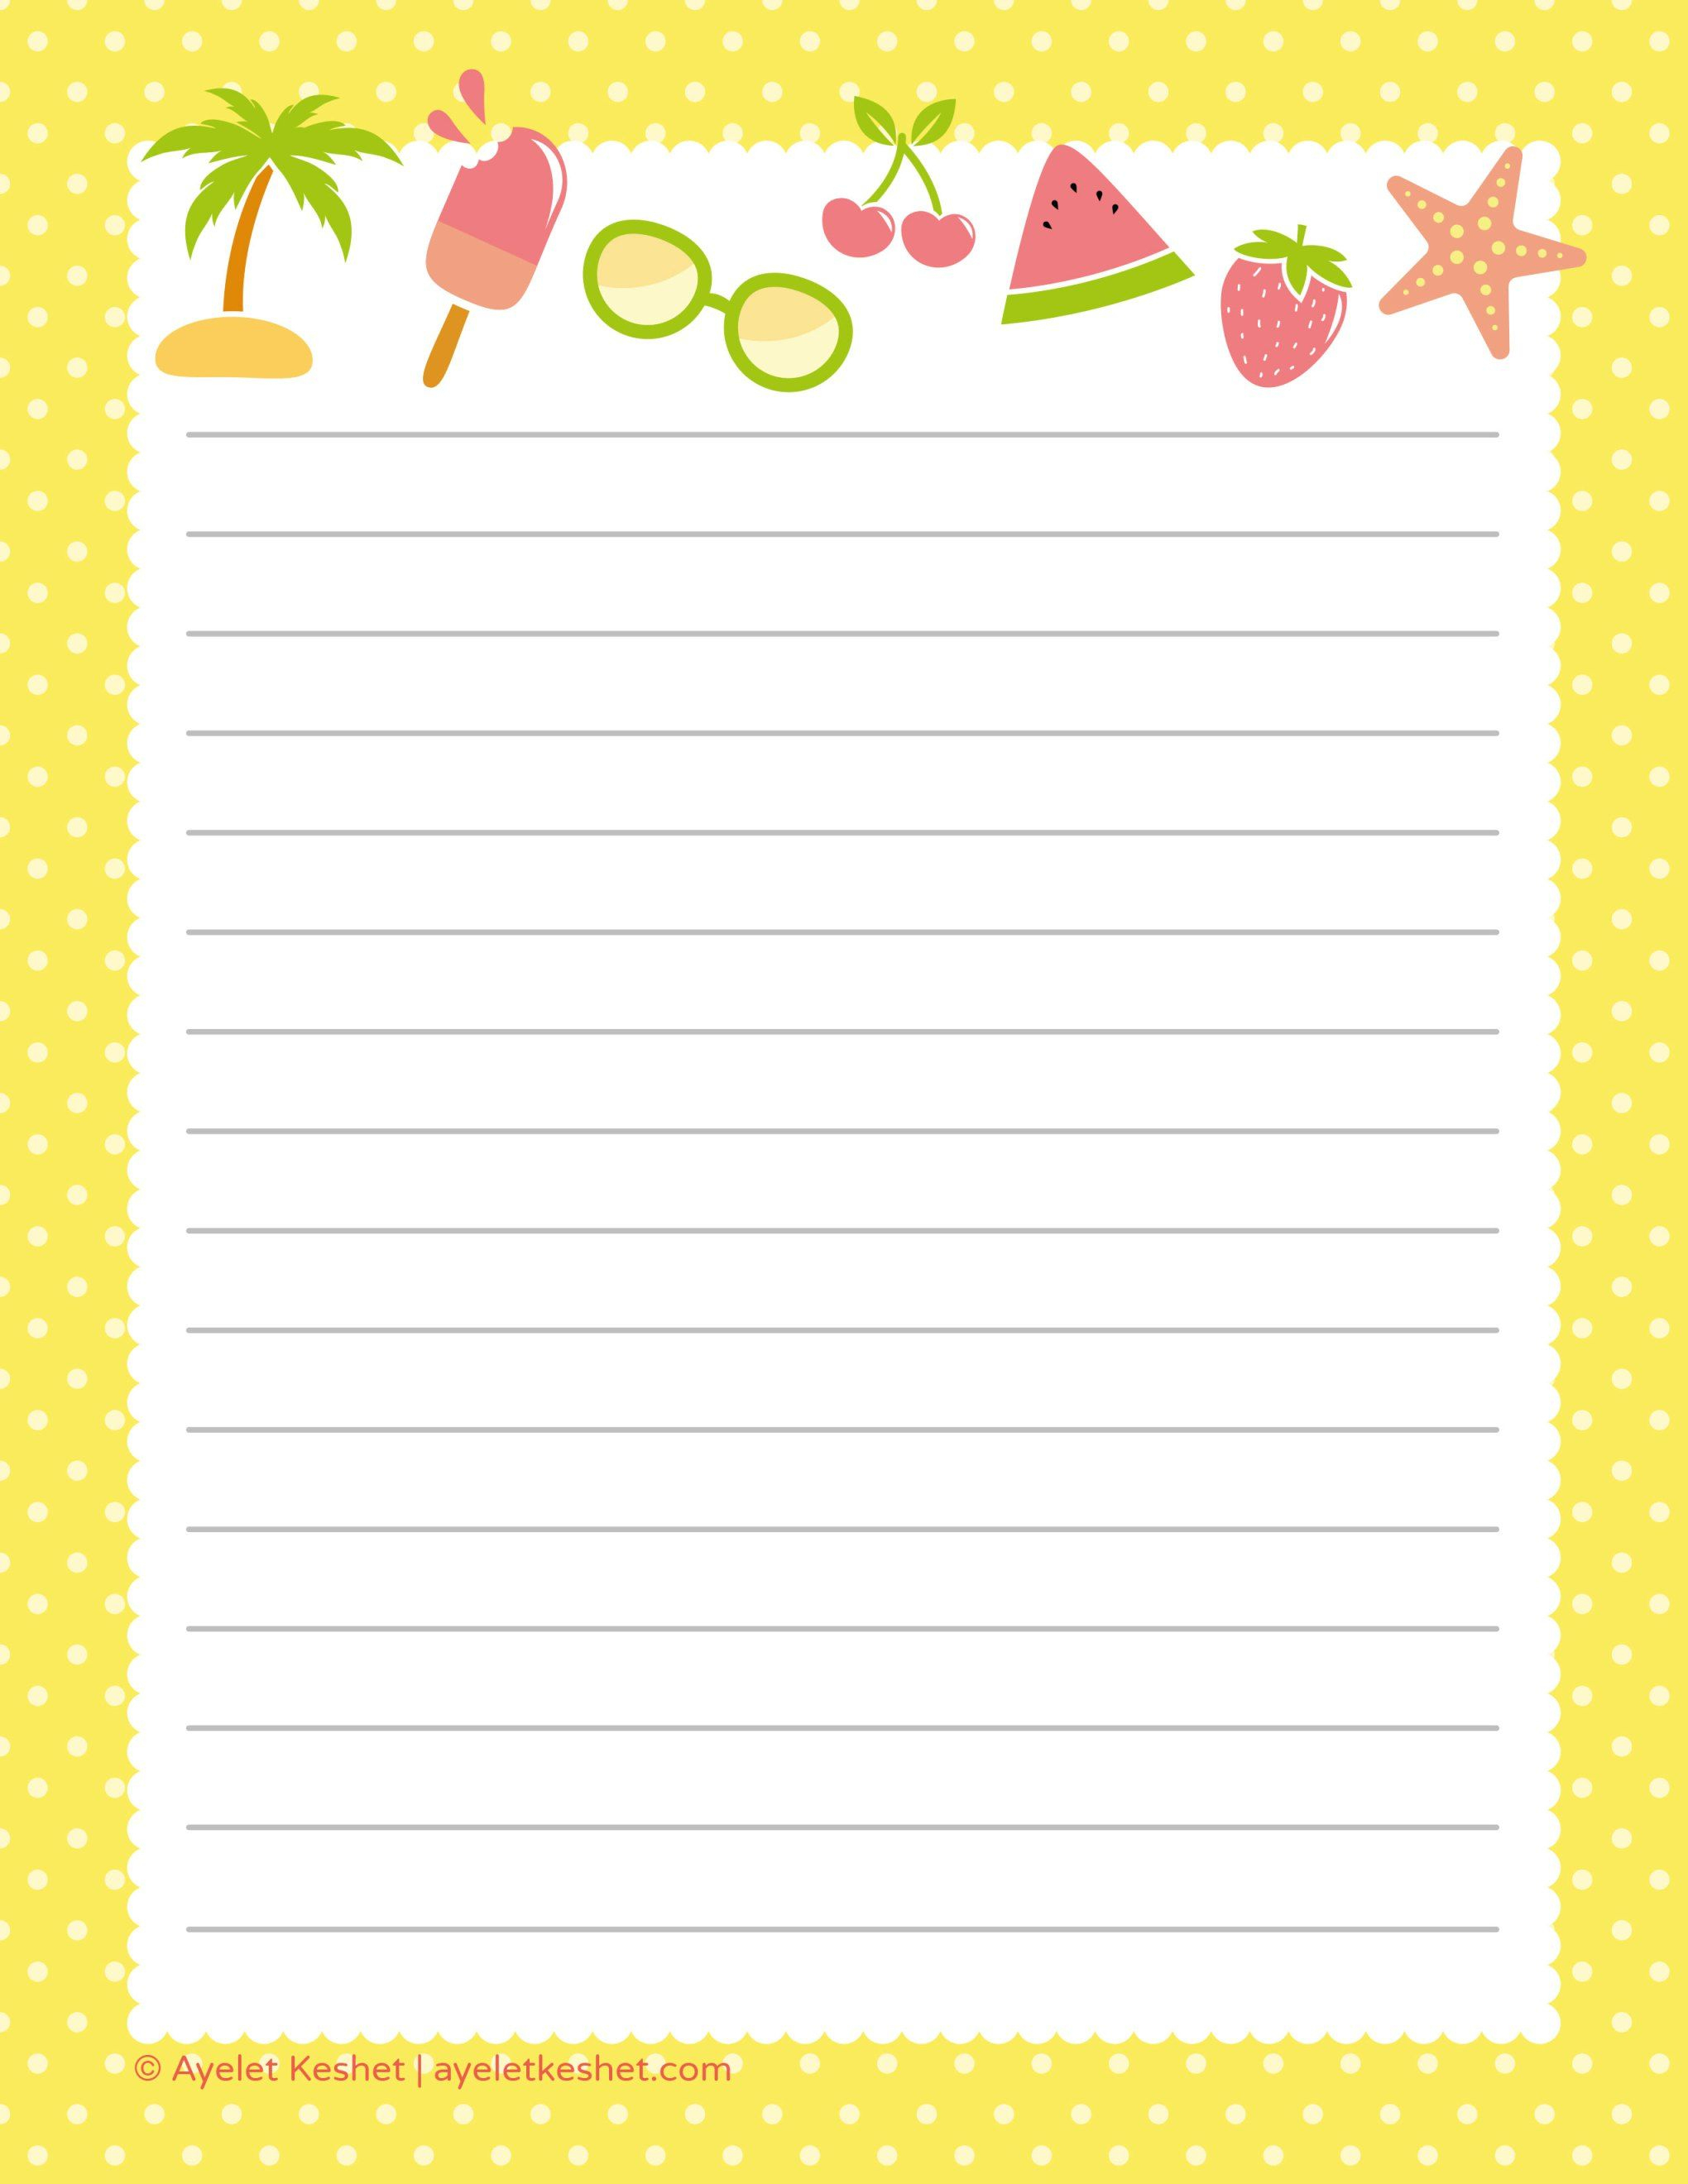 Free Printable Letter Paper | Printables To Go | Pinterest - Free Printable Stationery Paper